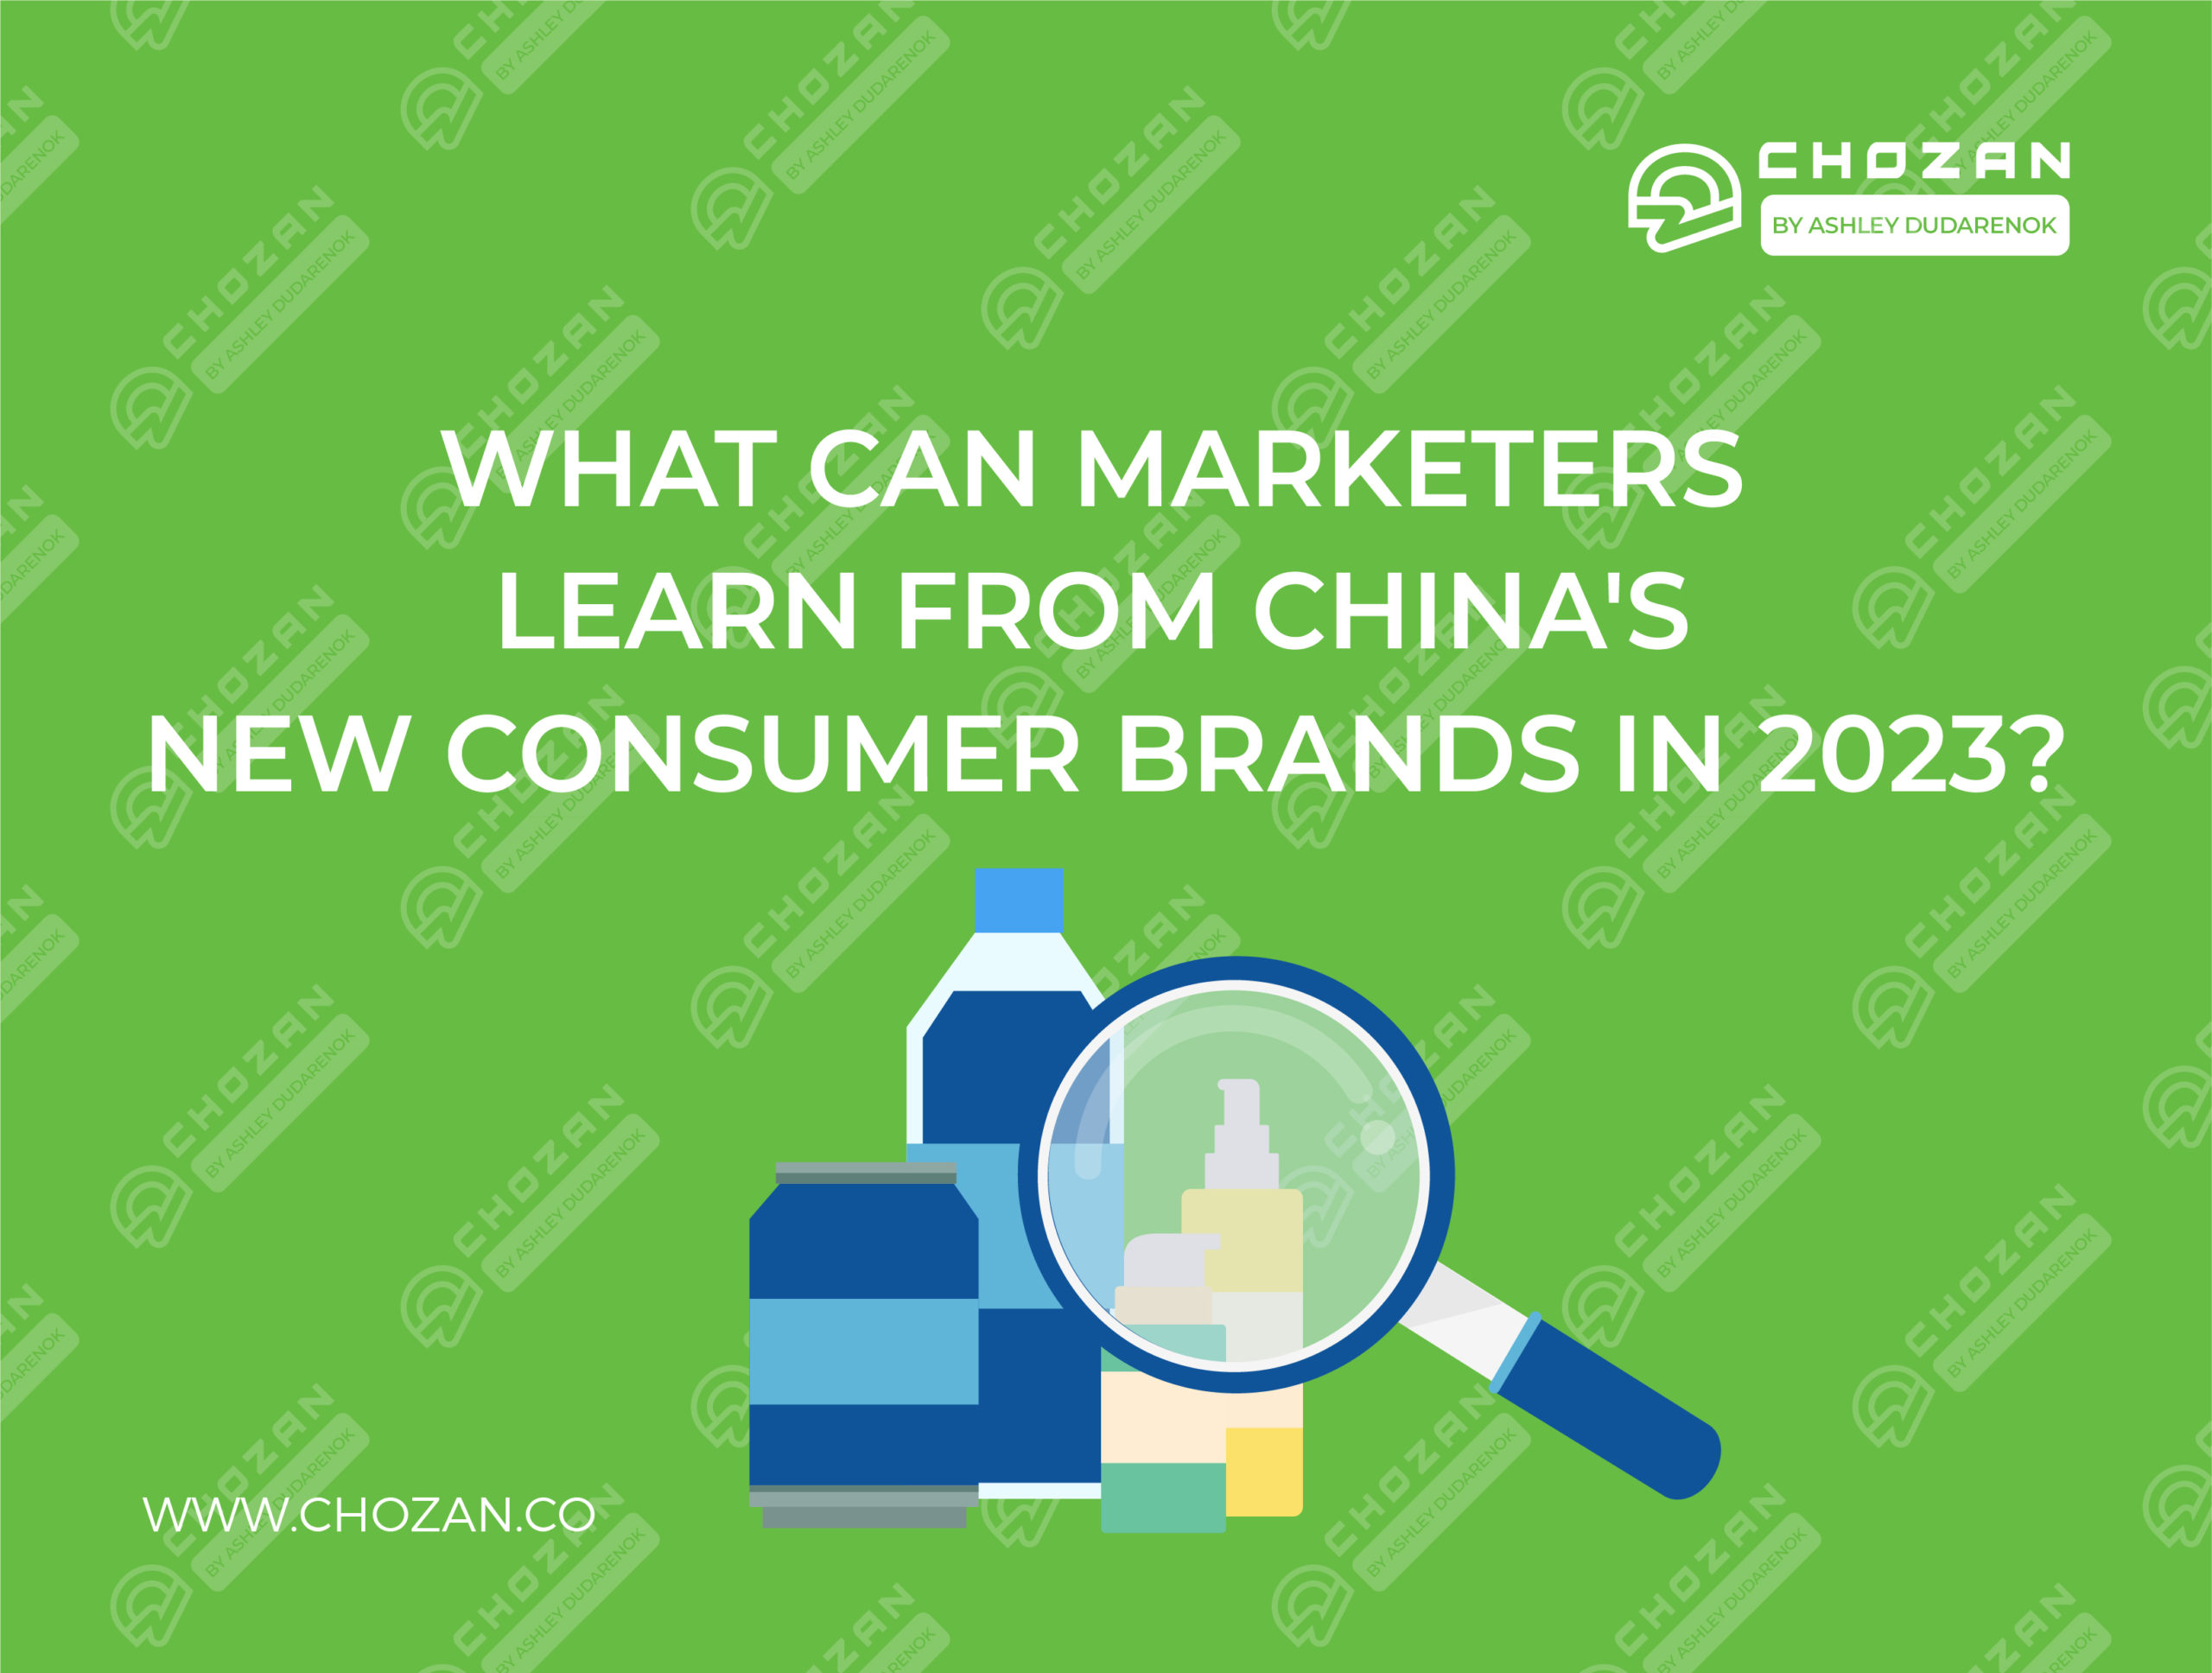 What Can Marketers Learn From China’s New Consumer Brands in 2023?